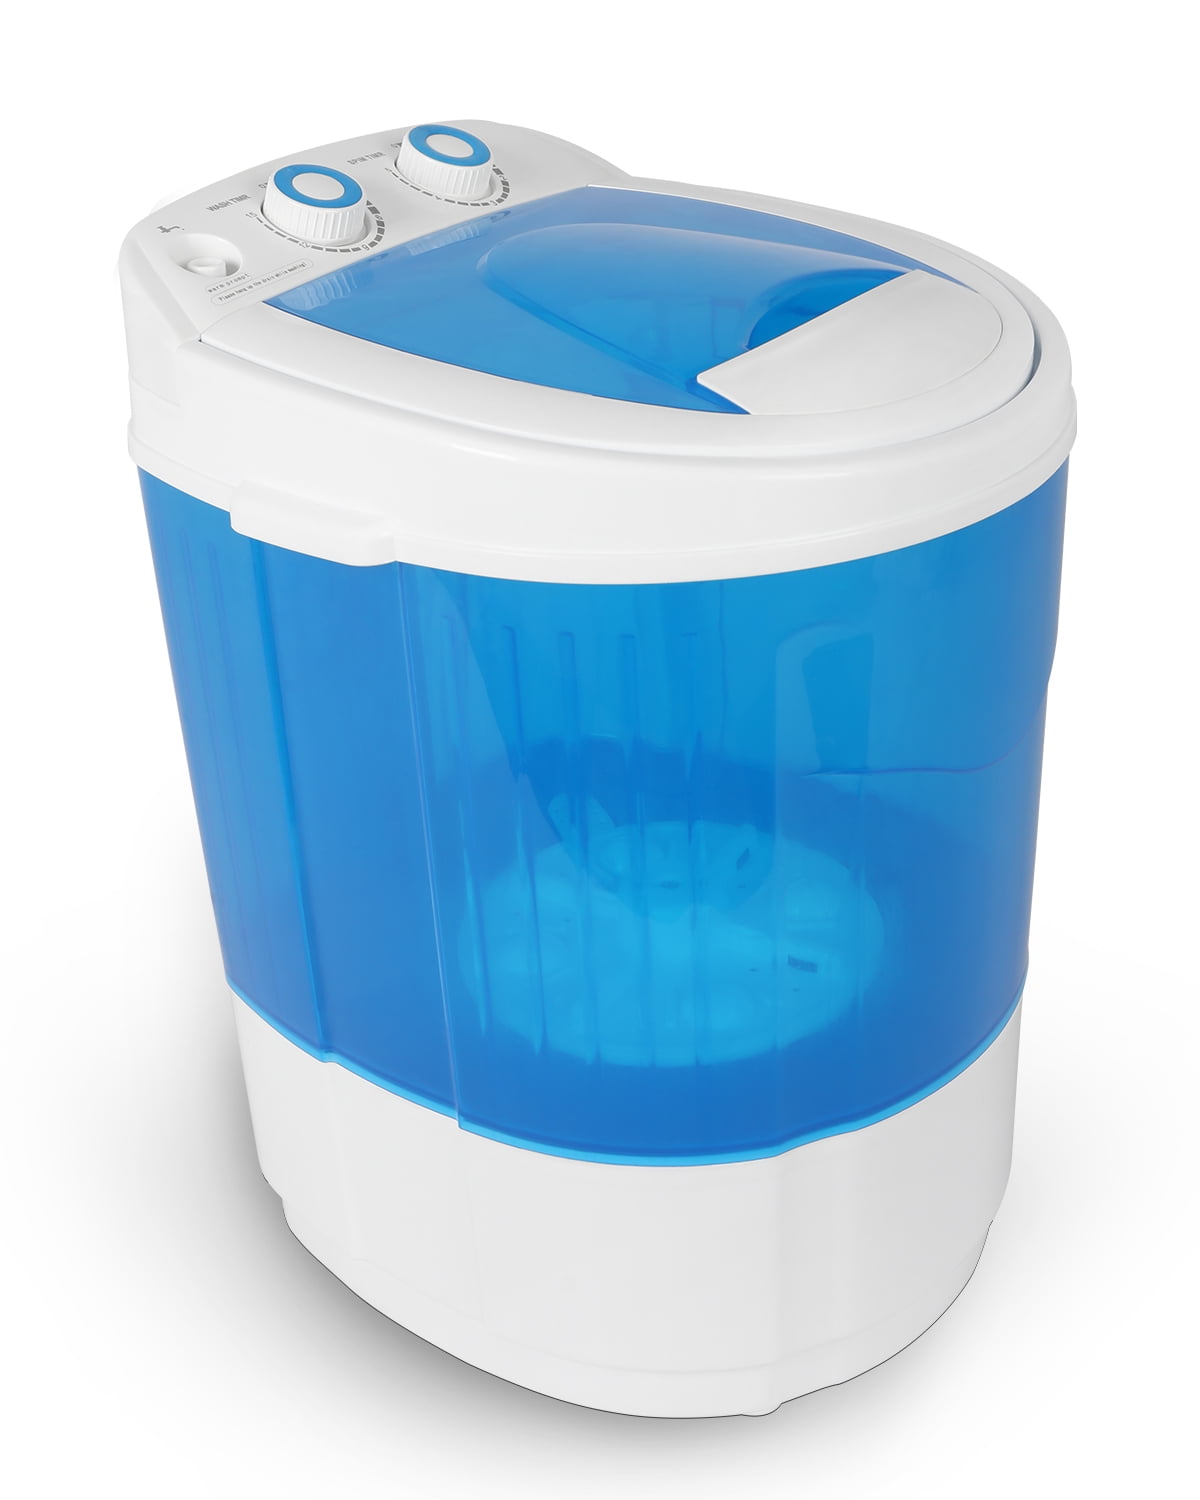 TABU Mini Portable Washing Machine with Spiner Basket, 7.7lbs Compact  Washer with Drain Hose (Blue) 